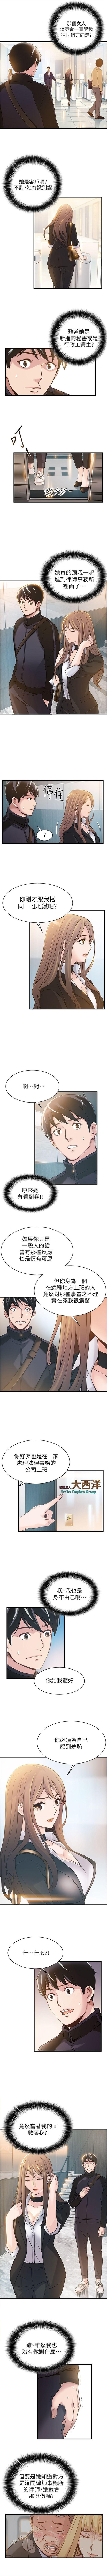 Wanking 弱點 1-101 官方中文（連載中） Chastity - Page 11